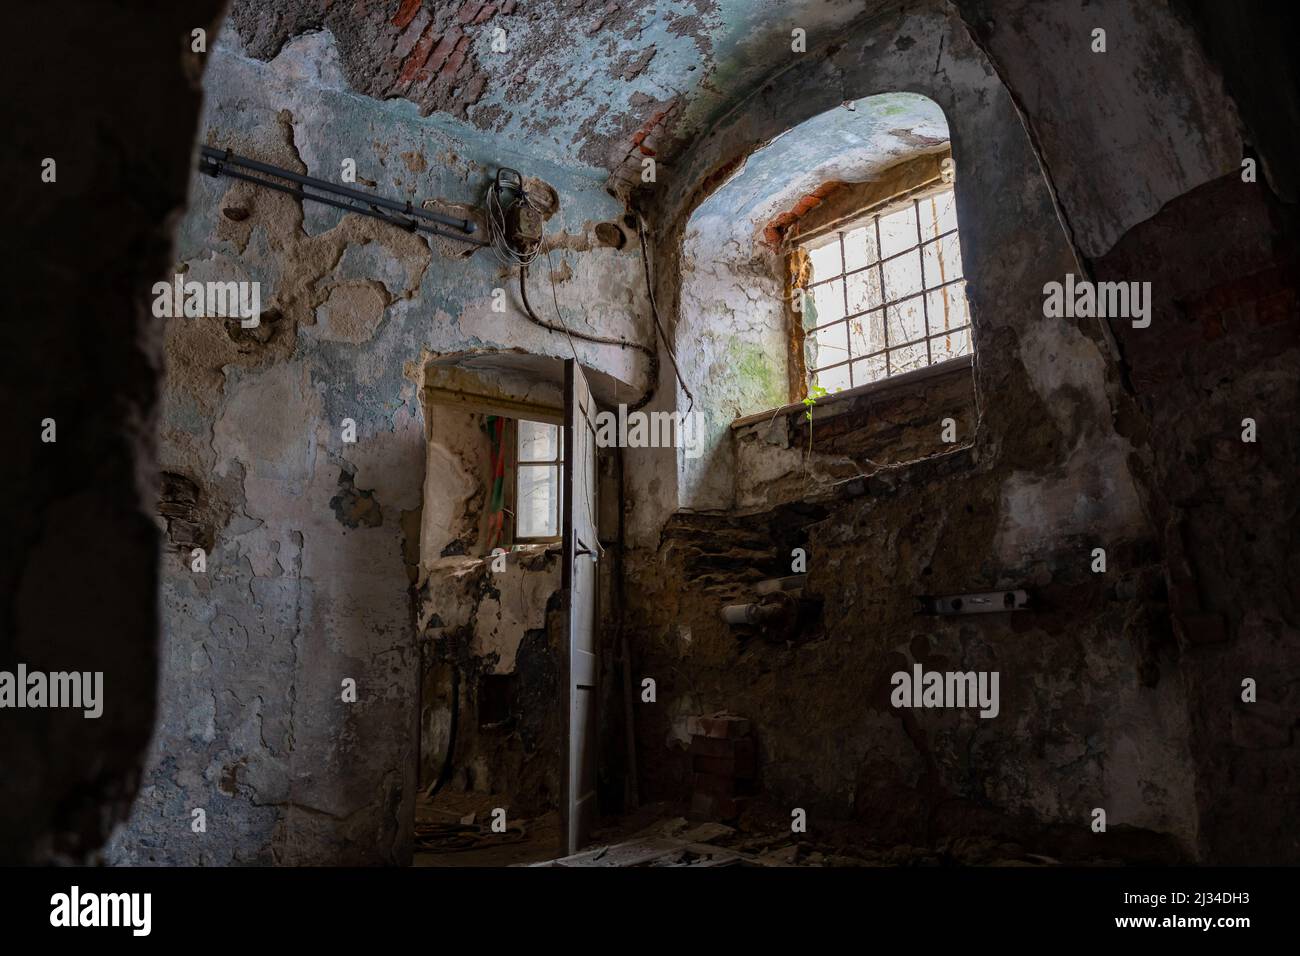 Basement of an abandoned building with damaged walls and interior in bad condition. Old ruin with paint peeling off. Eroded dangerous dirty house. Stock Photo